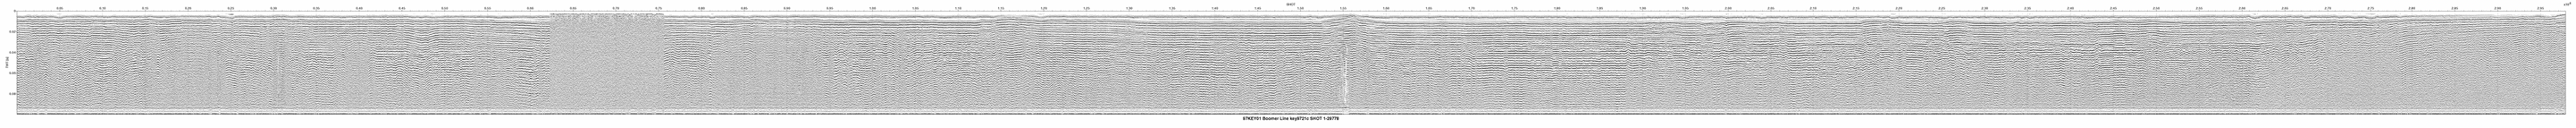 Thumbnail GIF image of the seismic trackline key9721c, with a hotlink to the more detailed, larger JPG image.